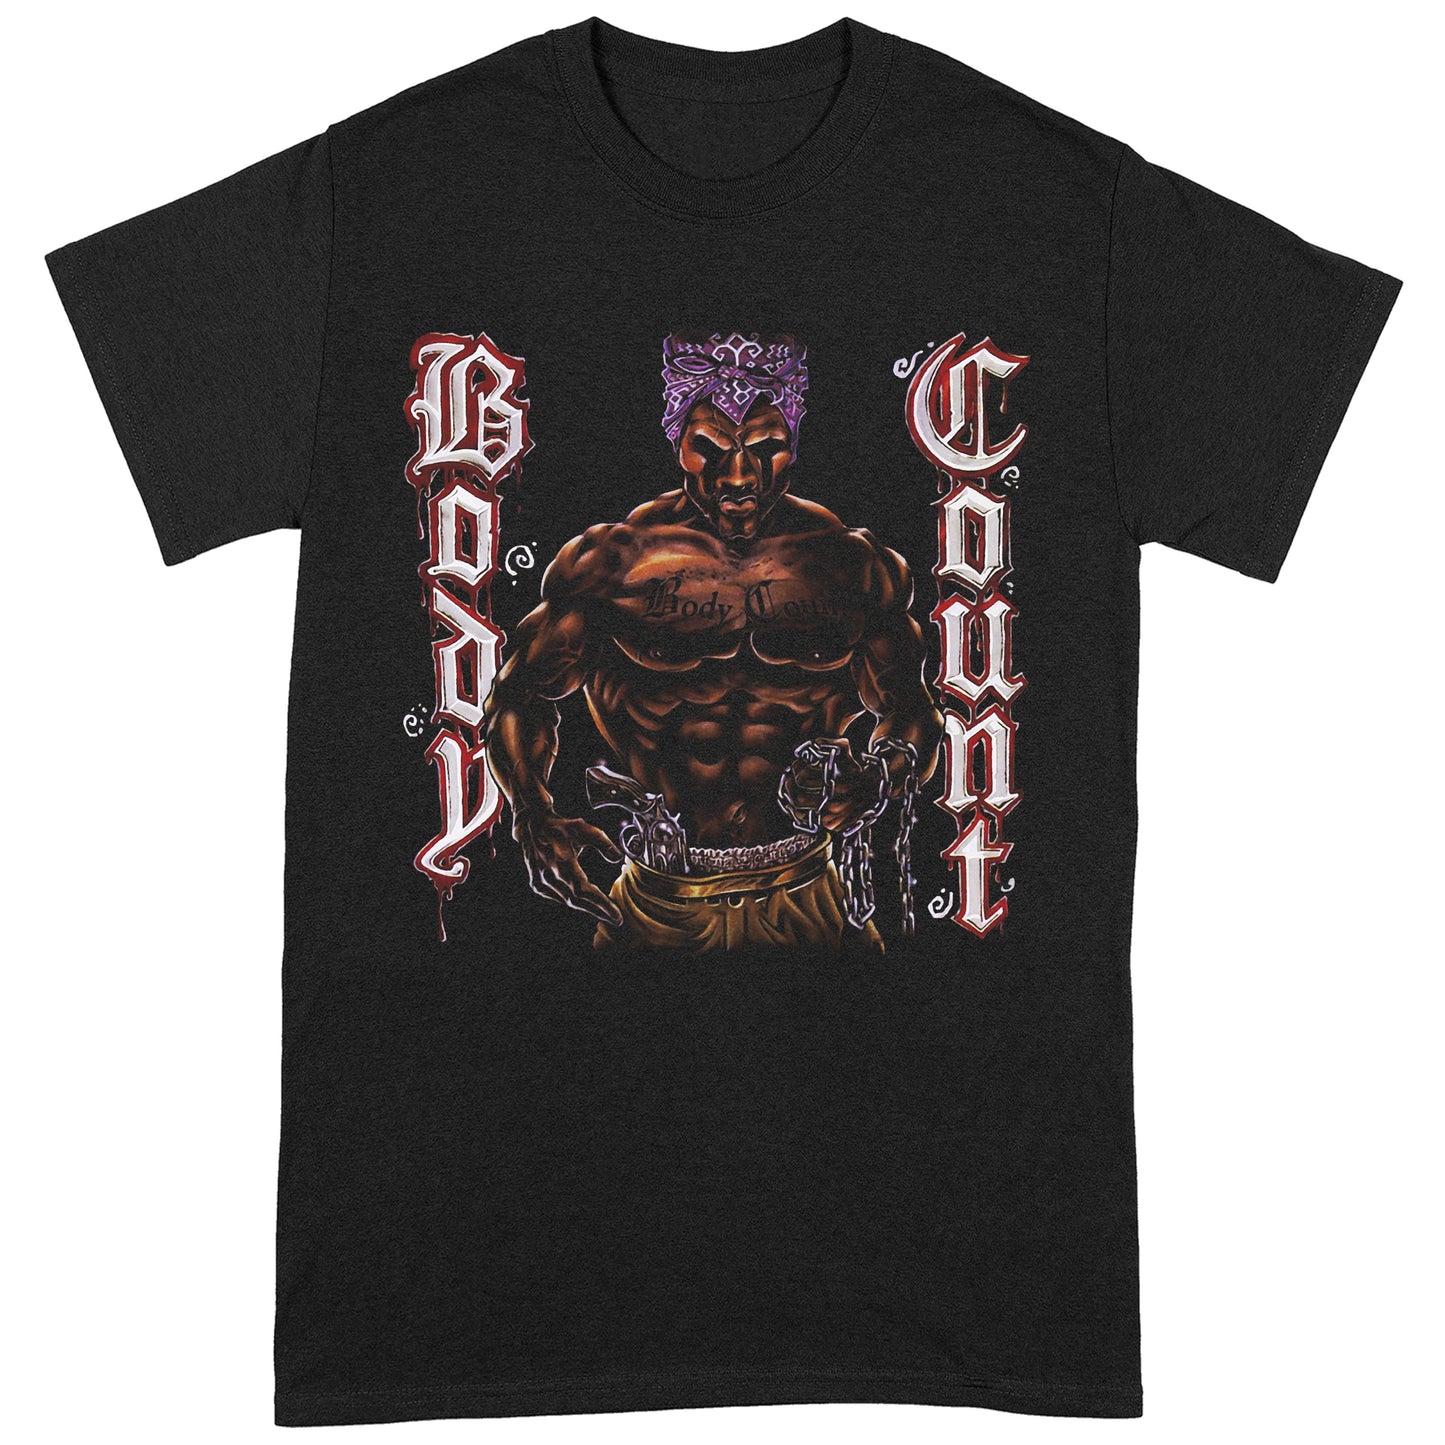 BODY COUNT - 1992 Cover T-Shirt